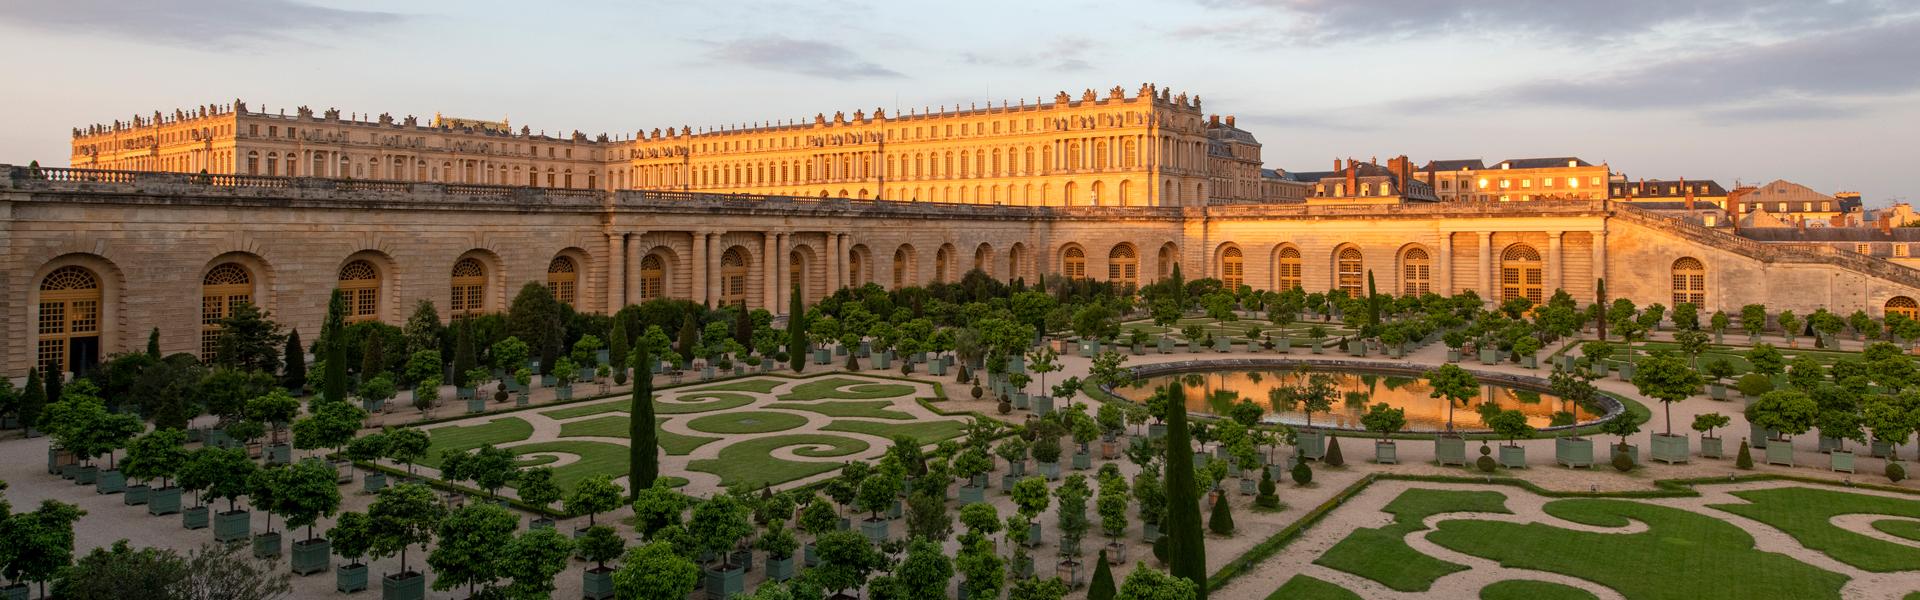 A Glimpse Into the Stunning Palace of Versailles